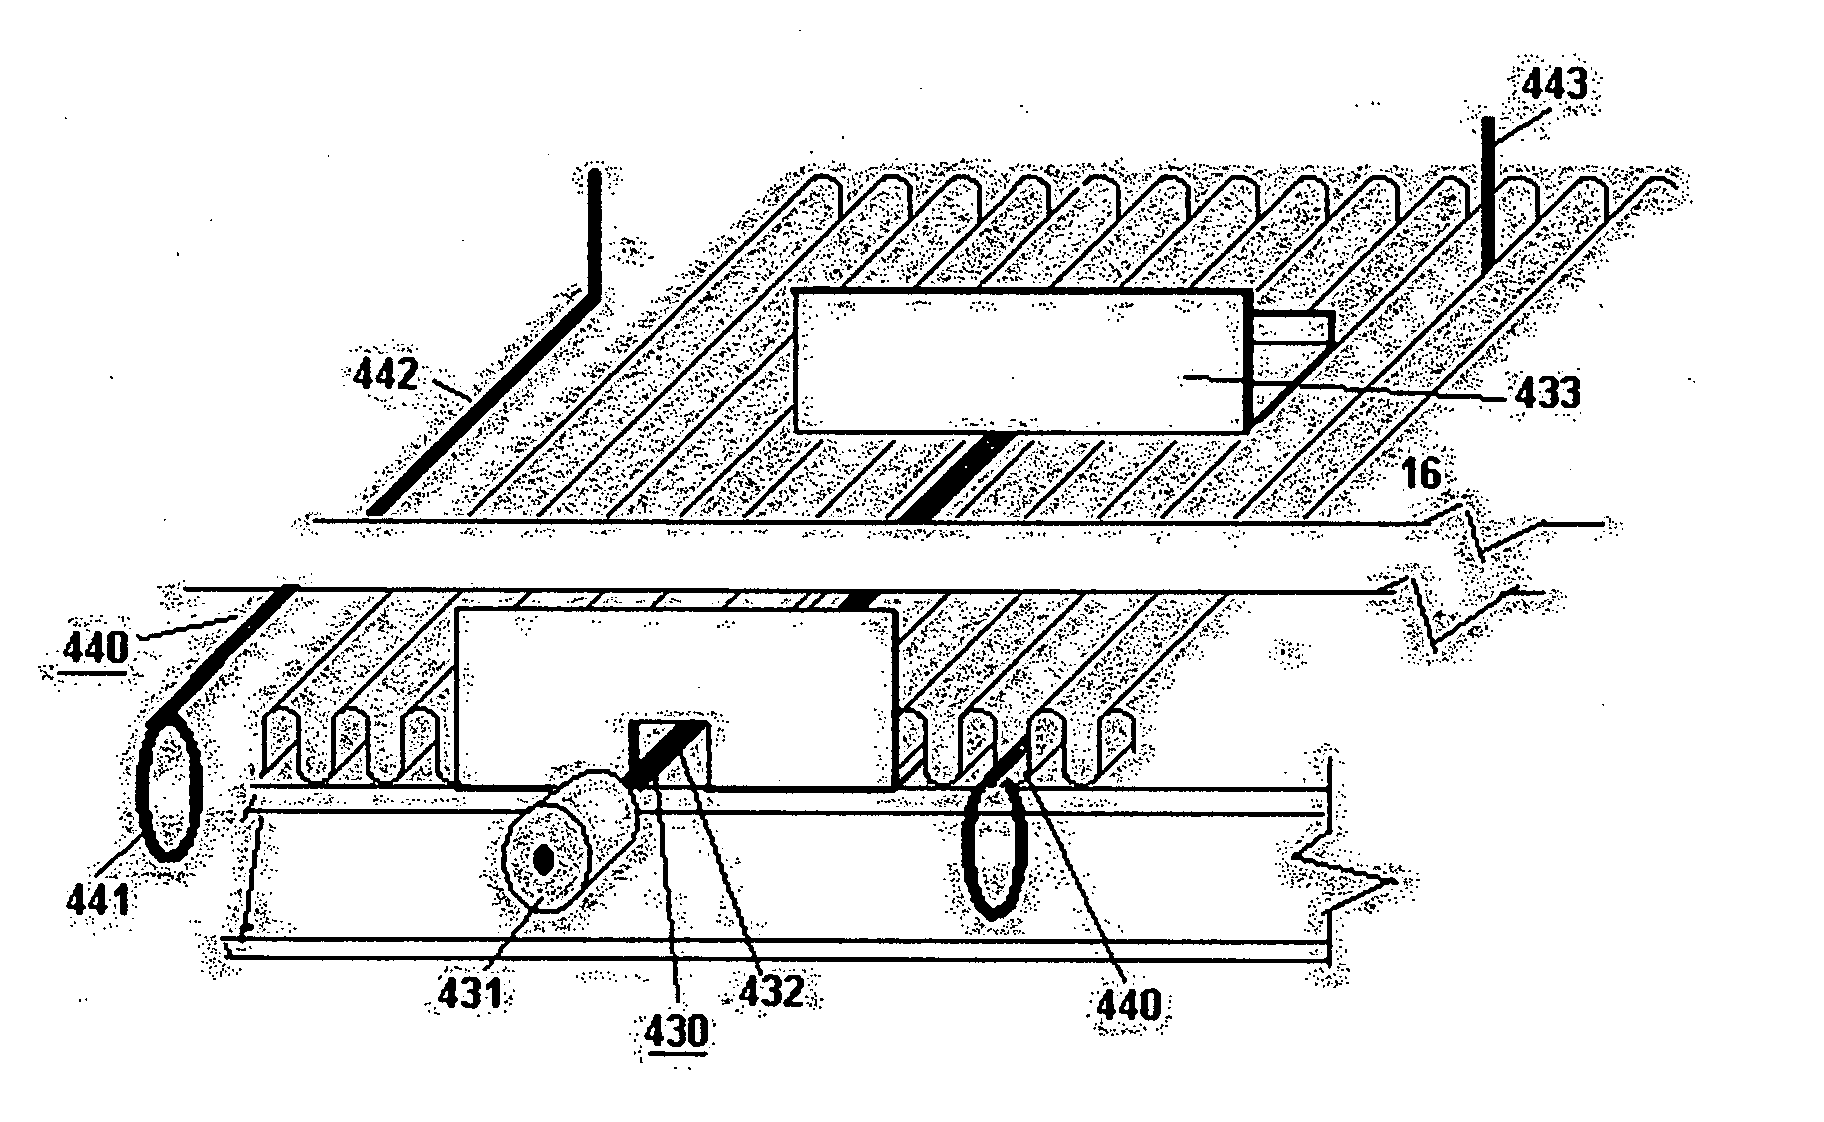 System and method for product display, arrangement and rotation